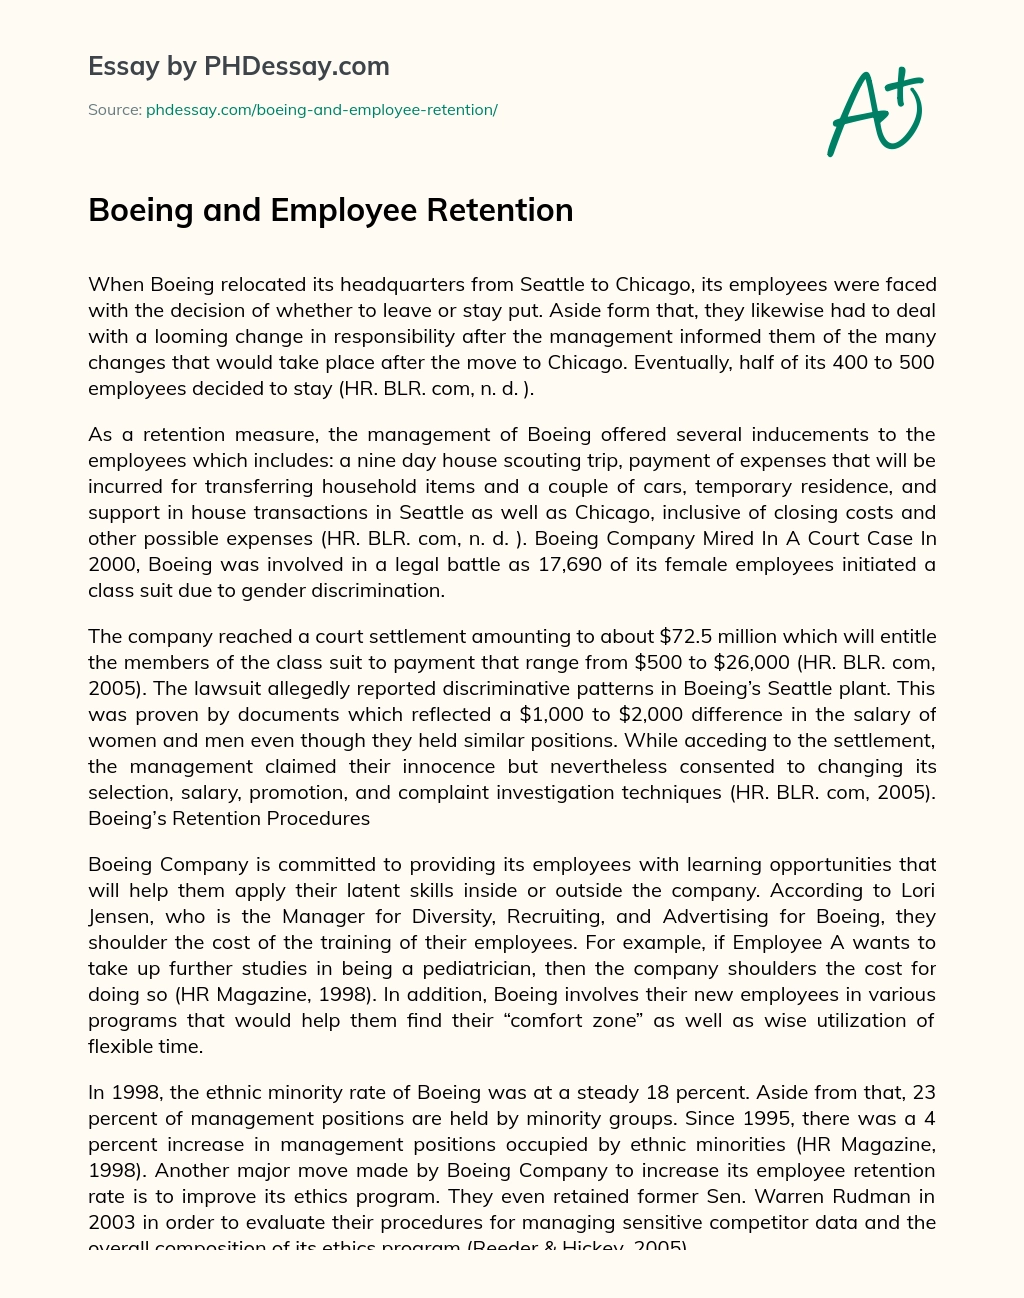 Boeing and Employee Retention essay